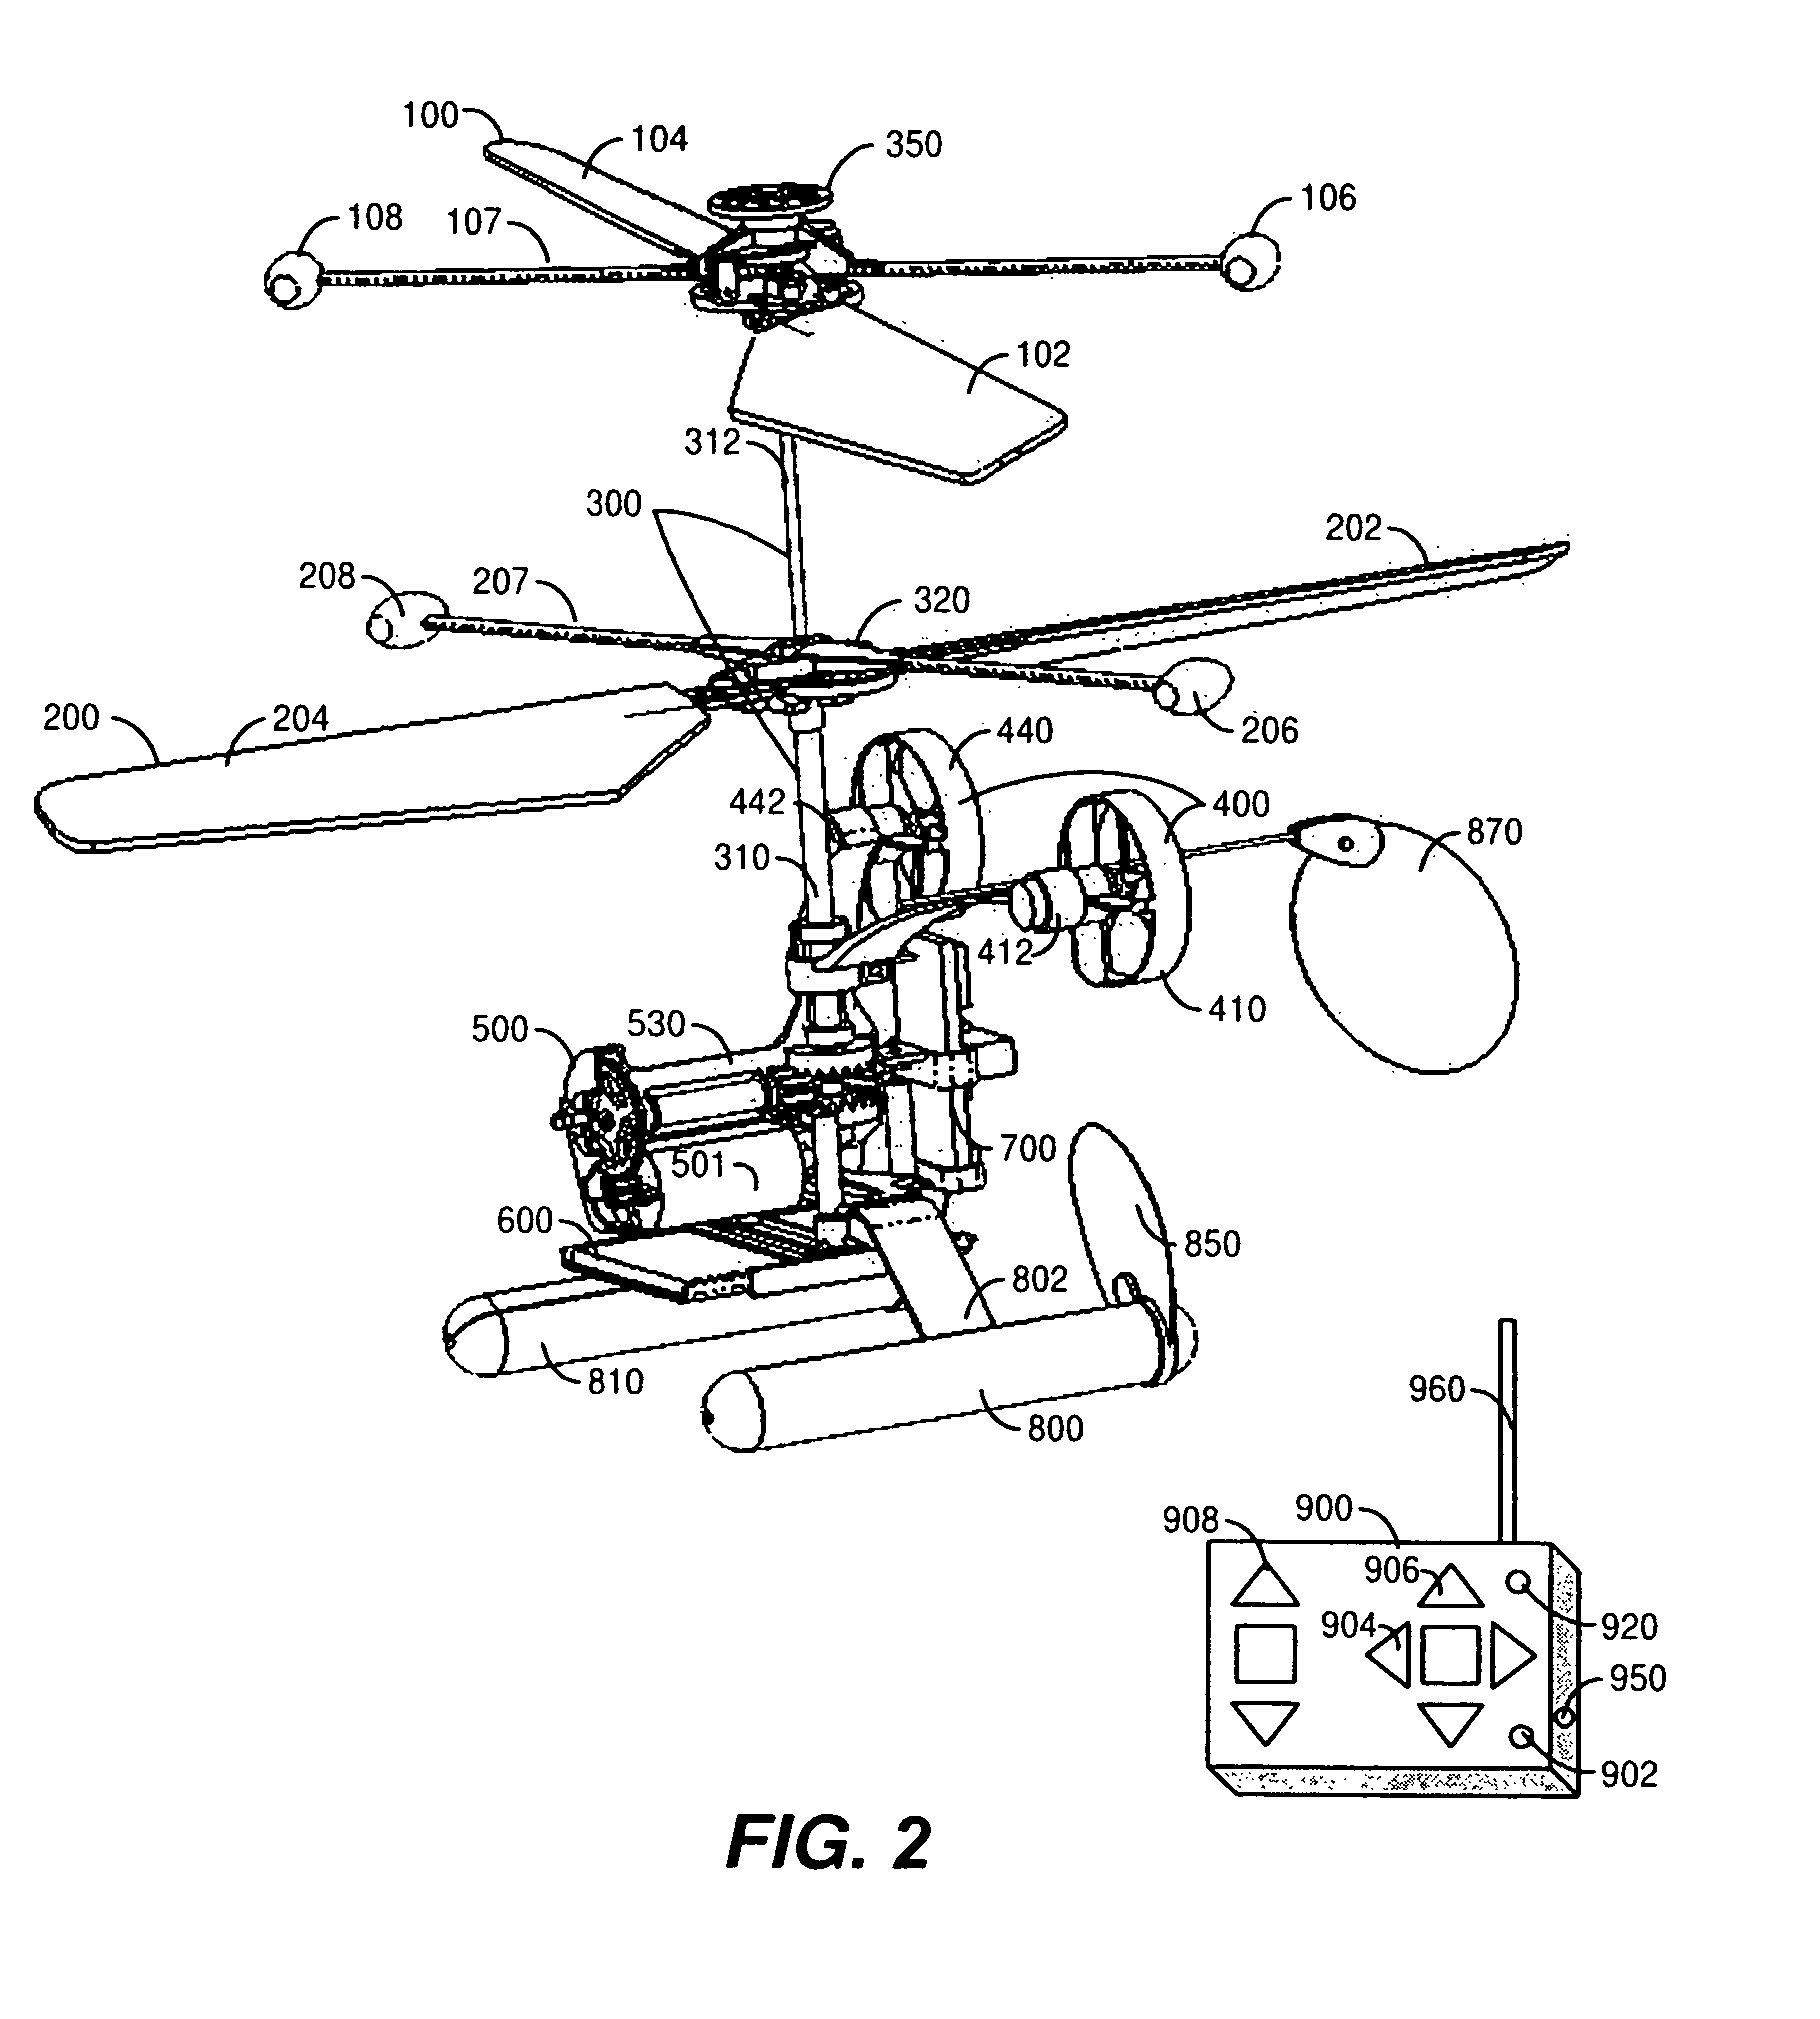 Rotary-wing vehicle system